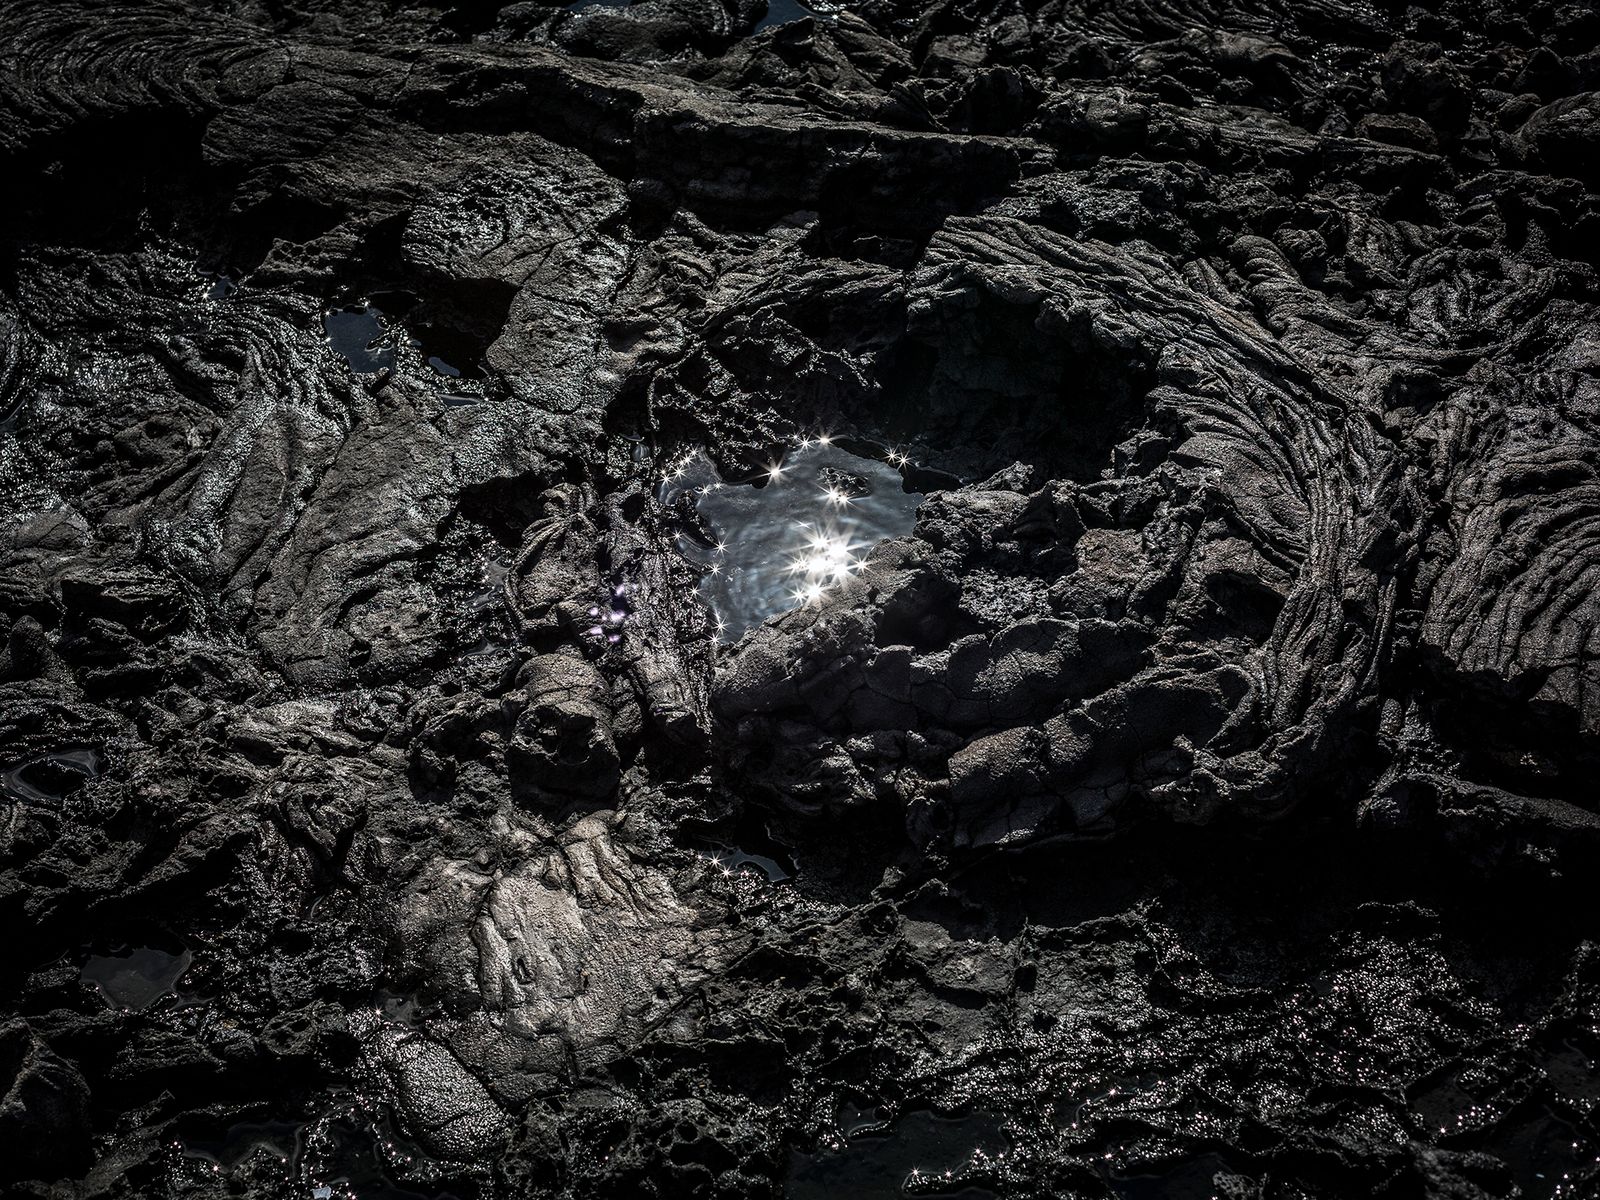 © Ilan Rabchinskey - Caldera. A pool of water reflects the sun in a pahoehoe lava formation in the Galapagos Islands.